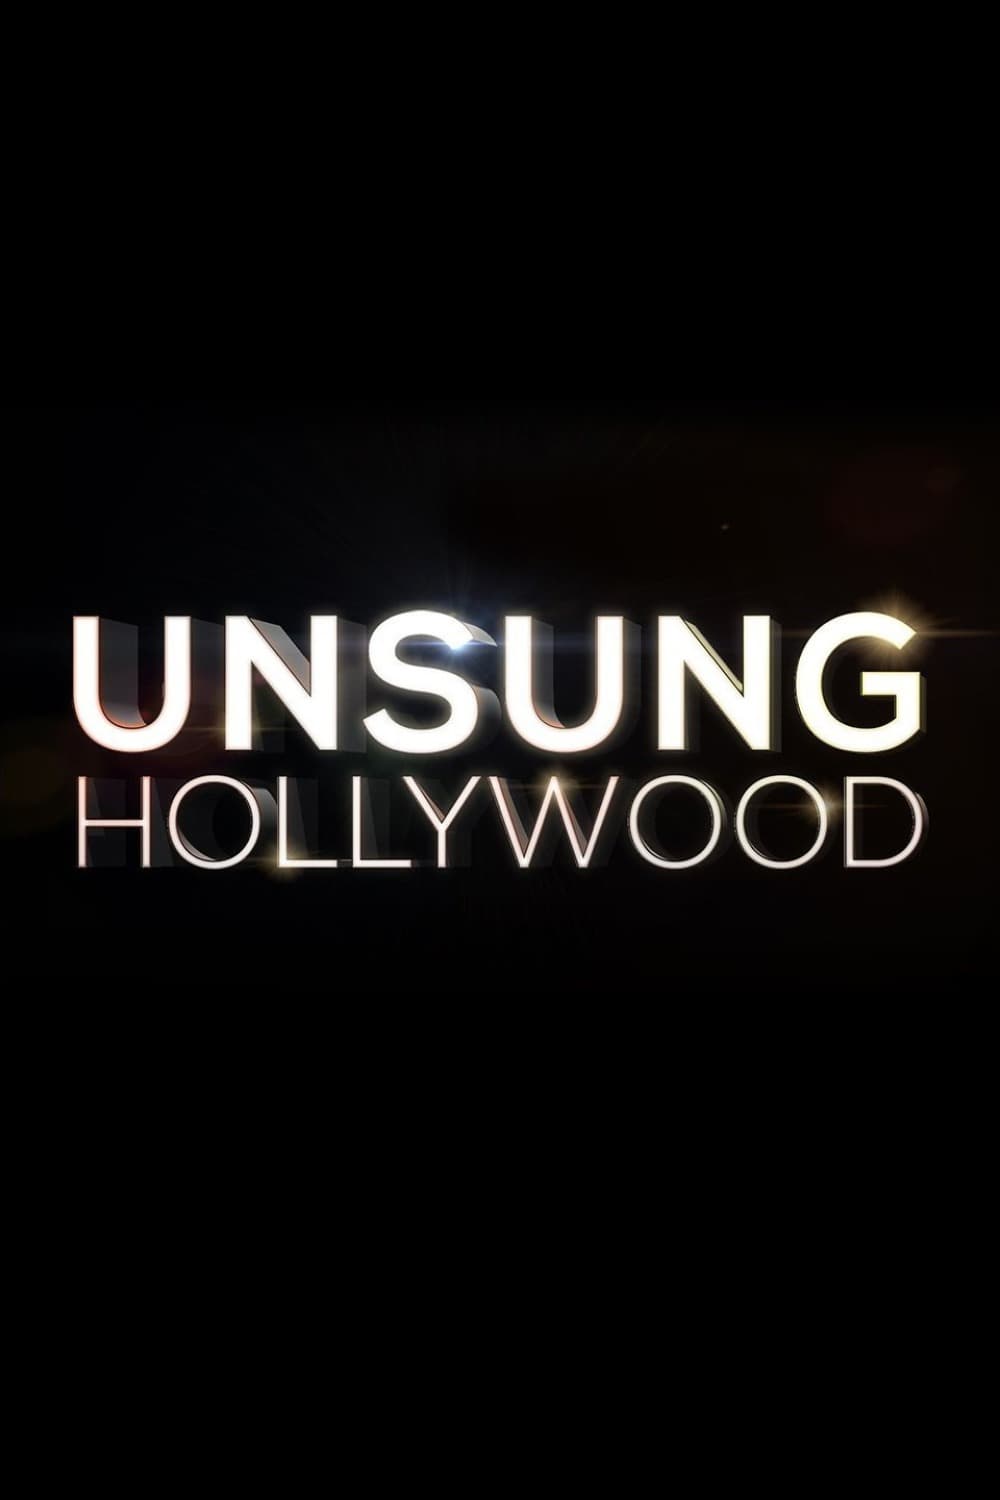 Unsung Hollywood poster